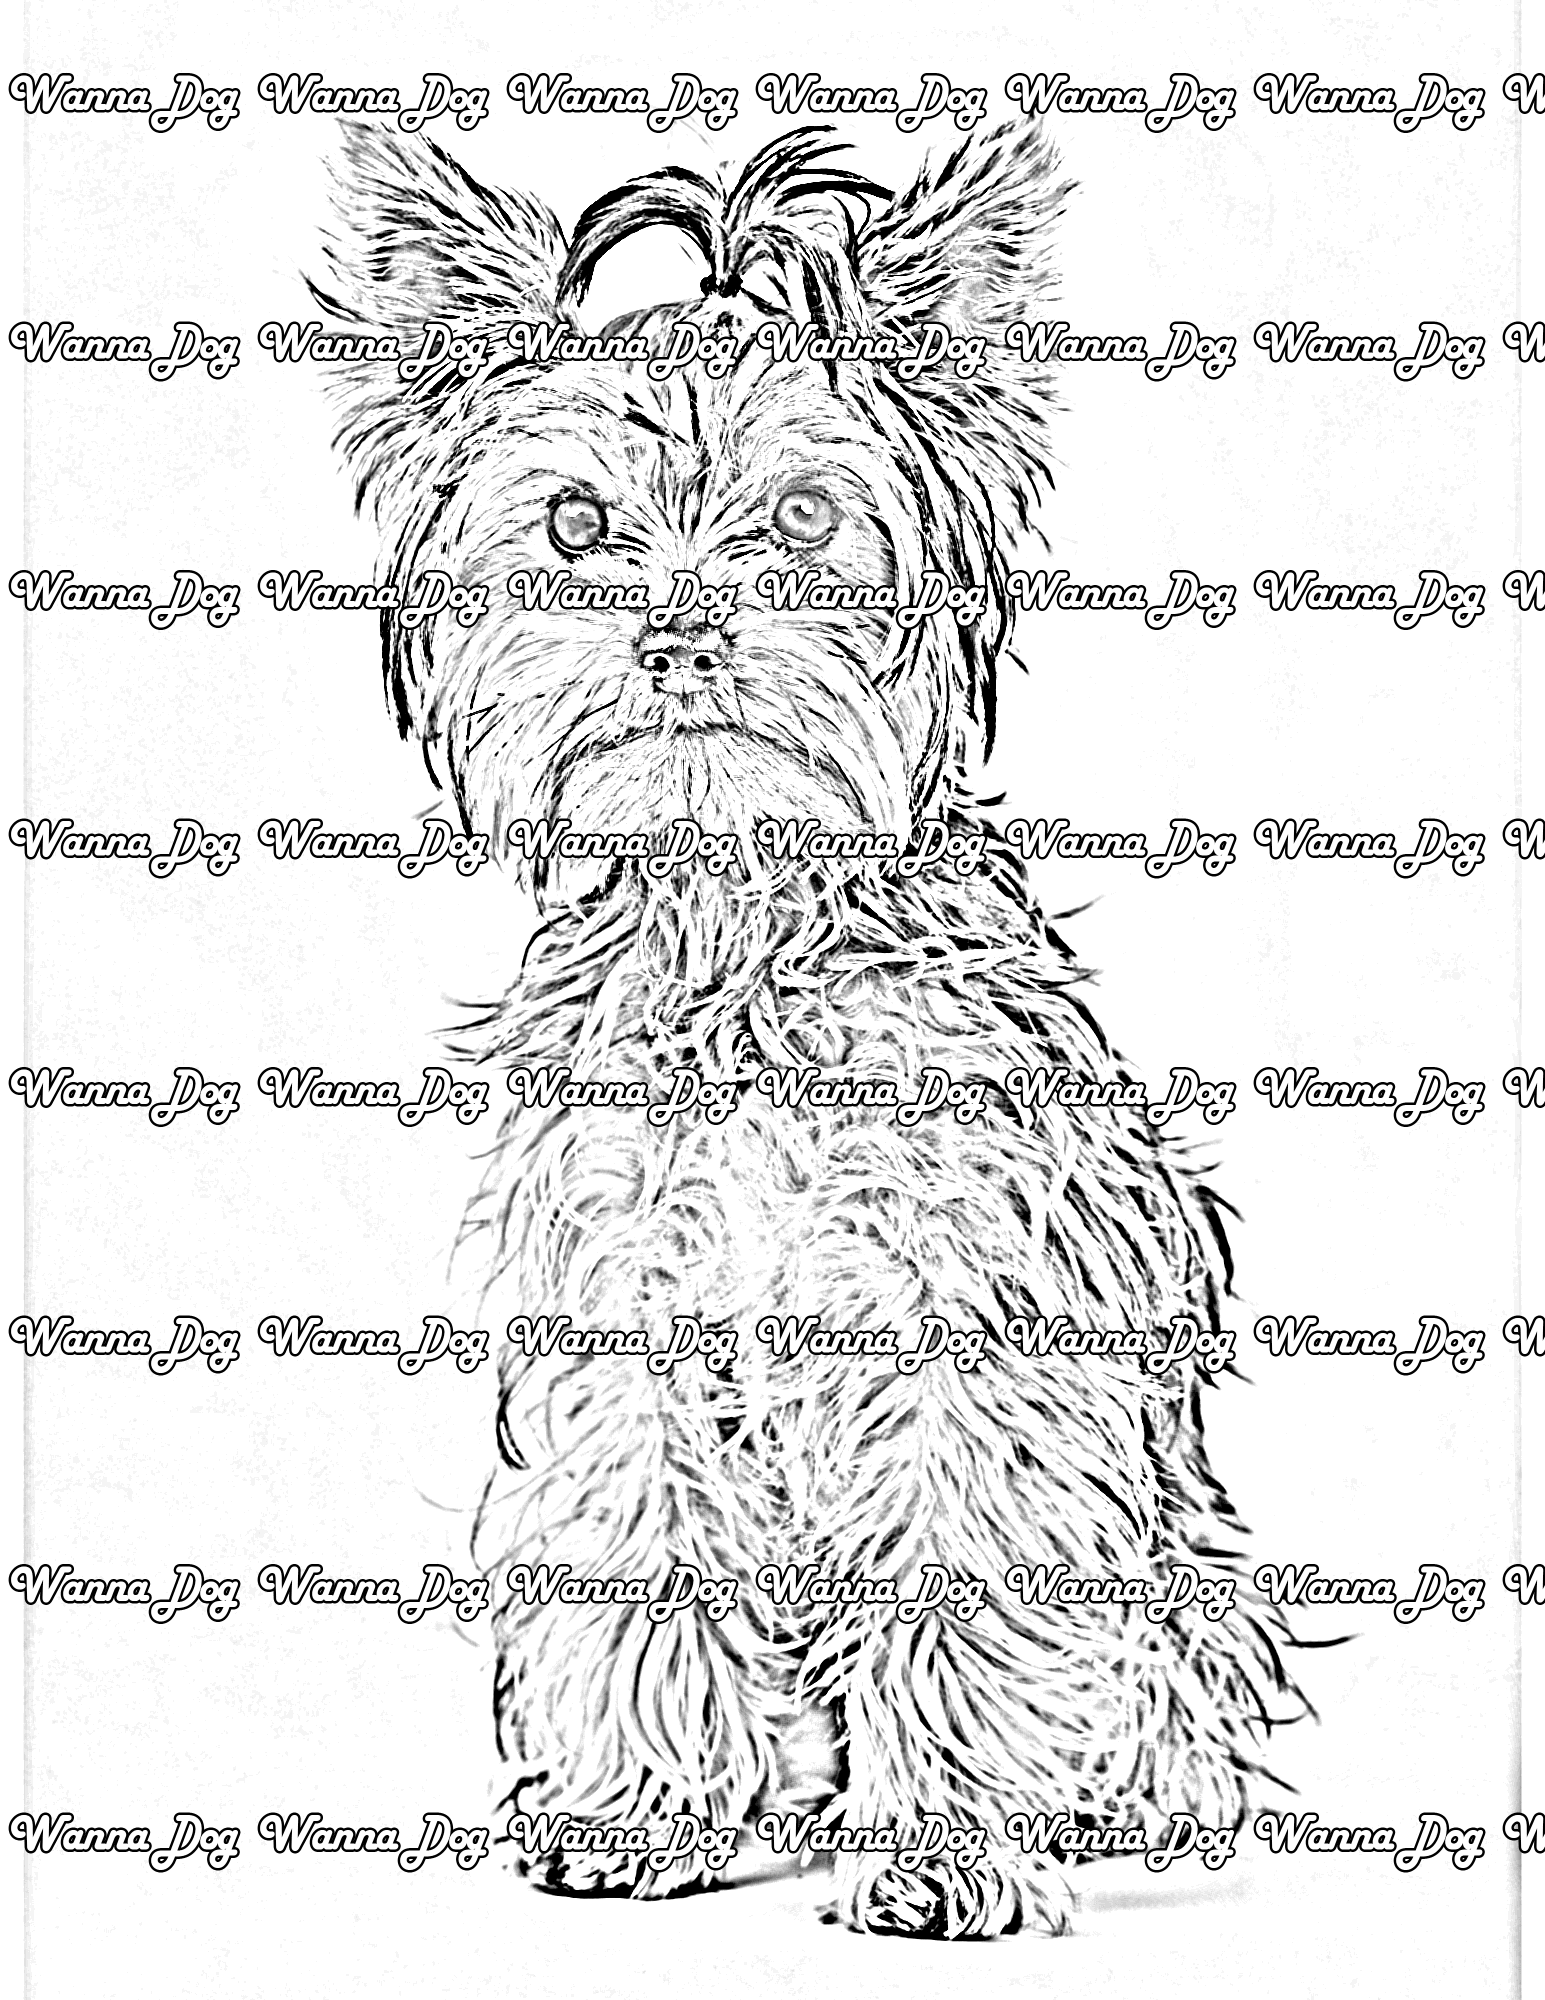 Yorkshire Terrier Coloring Pages of a Yorkshire Terrier posing